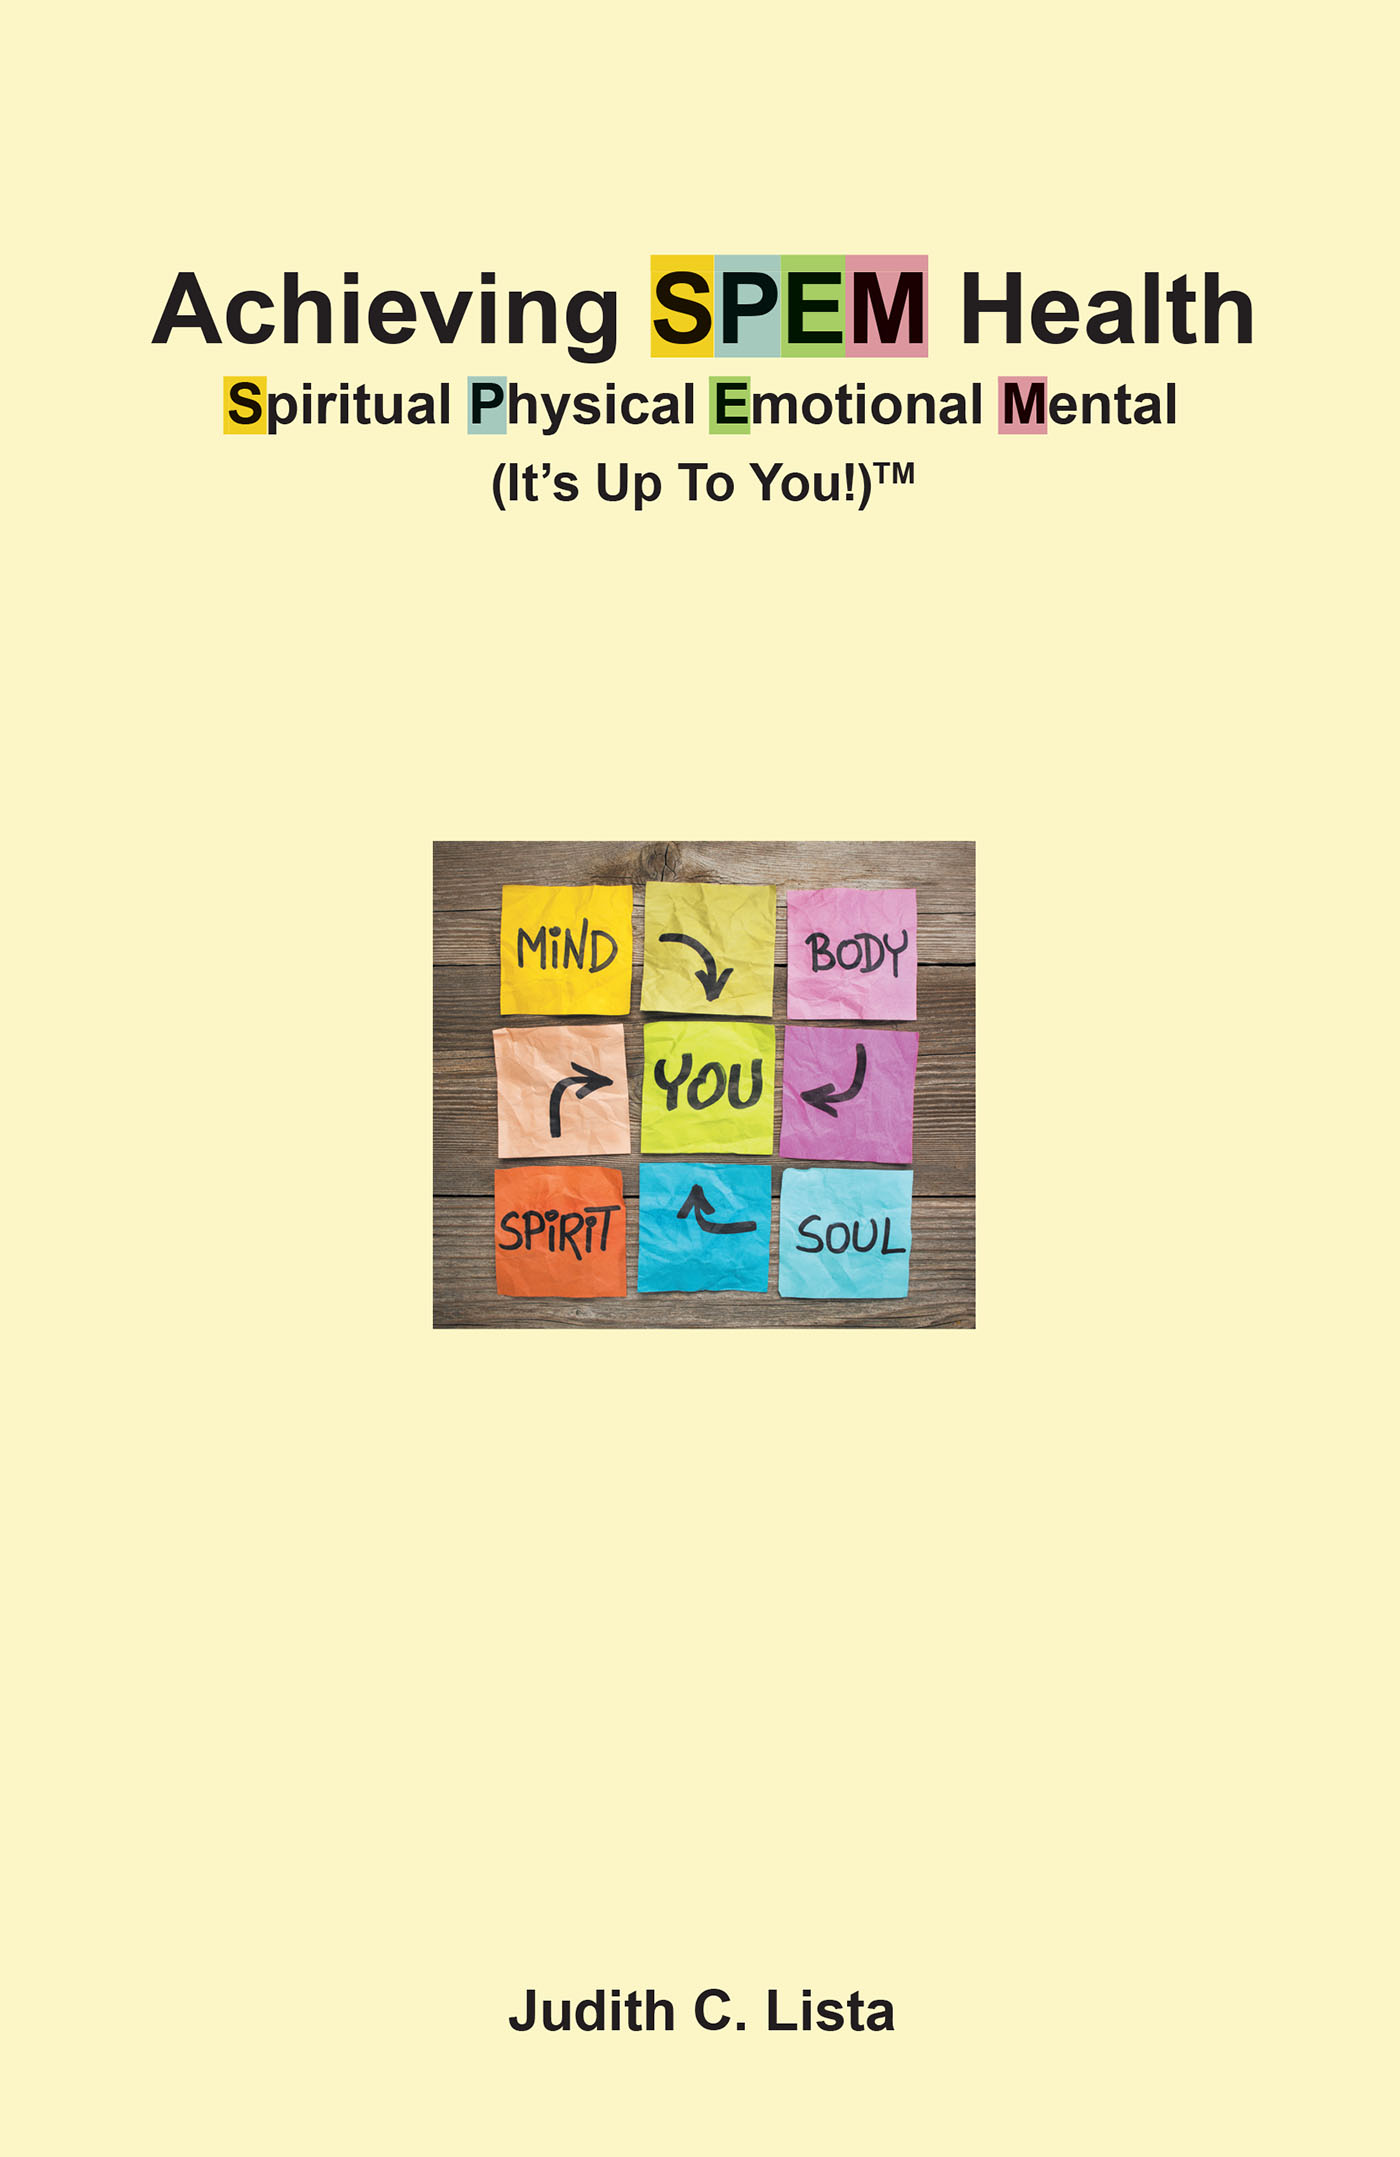 Judith C. Lista’s Newly Released “Achieving SPEM Health Spiritual Physical Emotional Mental (It’s Up to You!) TM” is a Resource to Improve Mind, Body, and Spirit Health